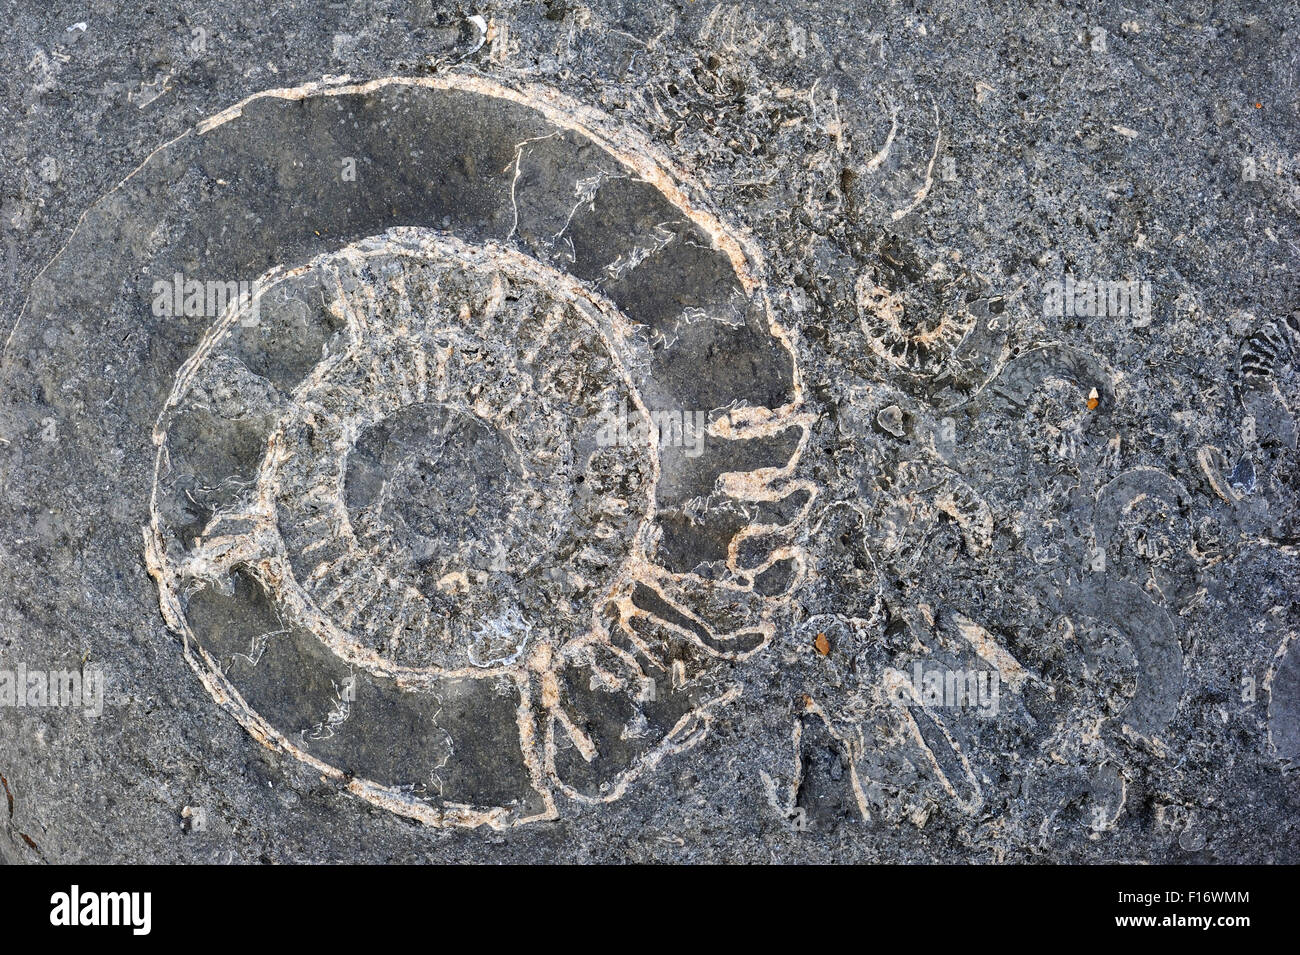 Ammonite fossils embedded in rock on beach at Pinhay Bay near Lyme Regis along the Jurassic Coast, Dorset, southern England, UK Stock Photo